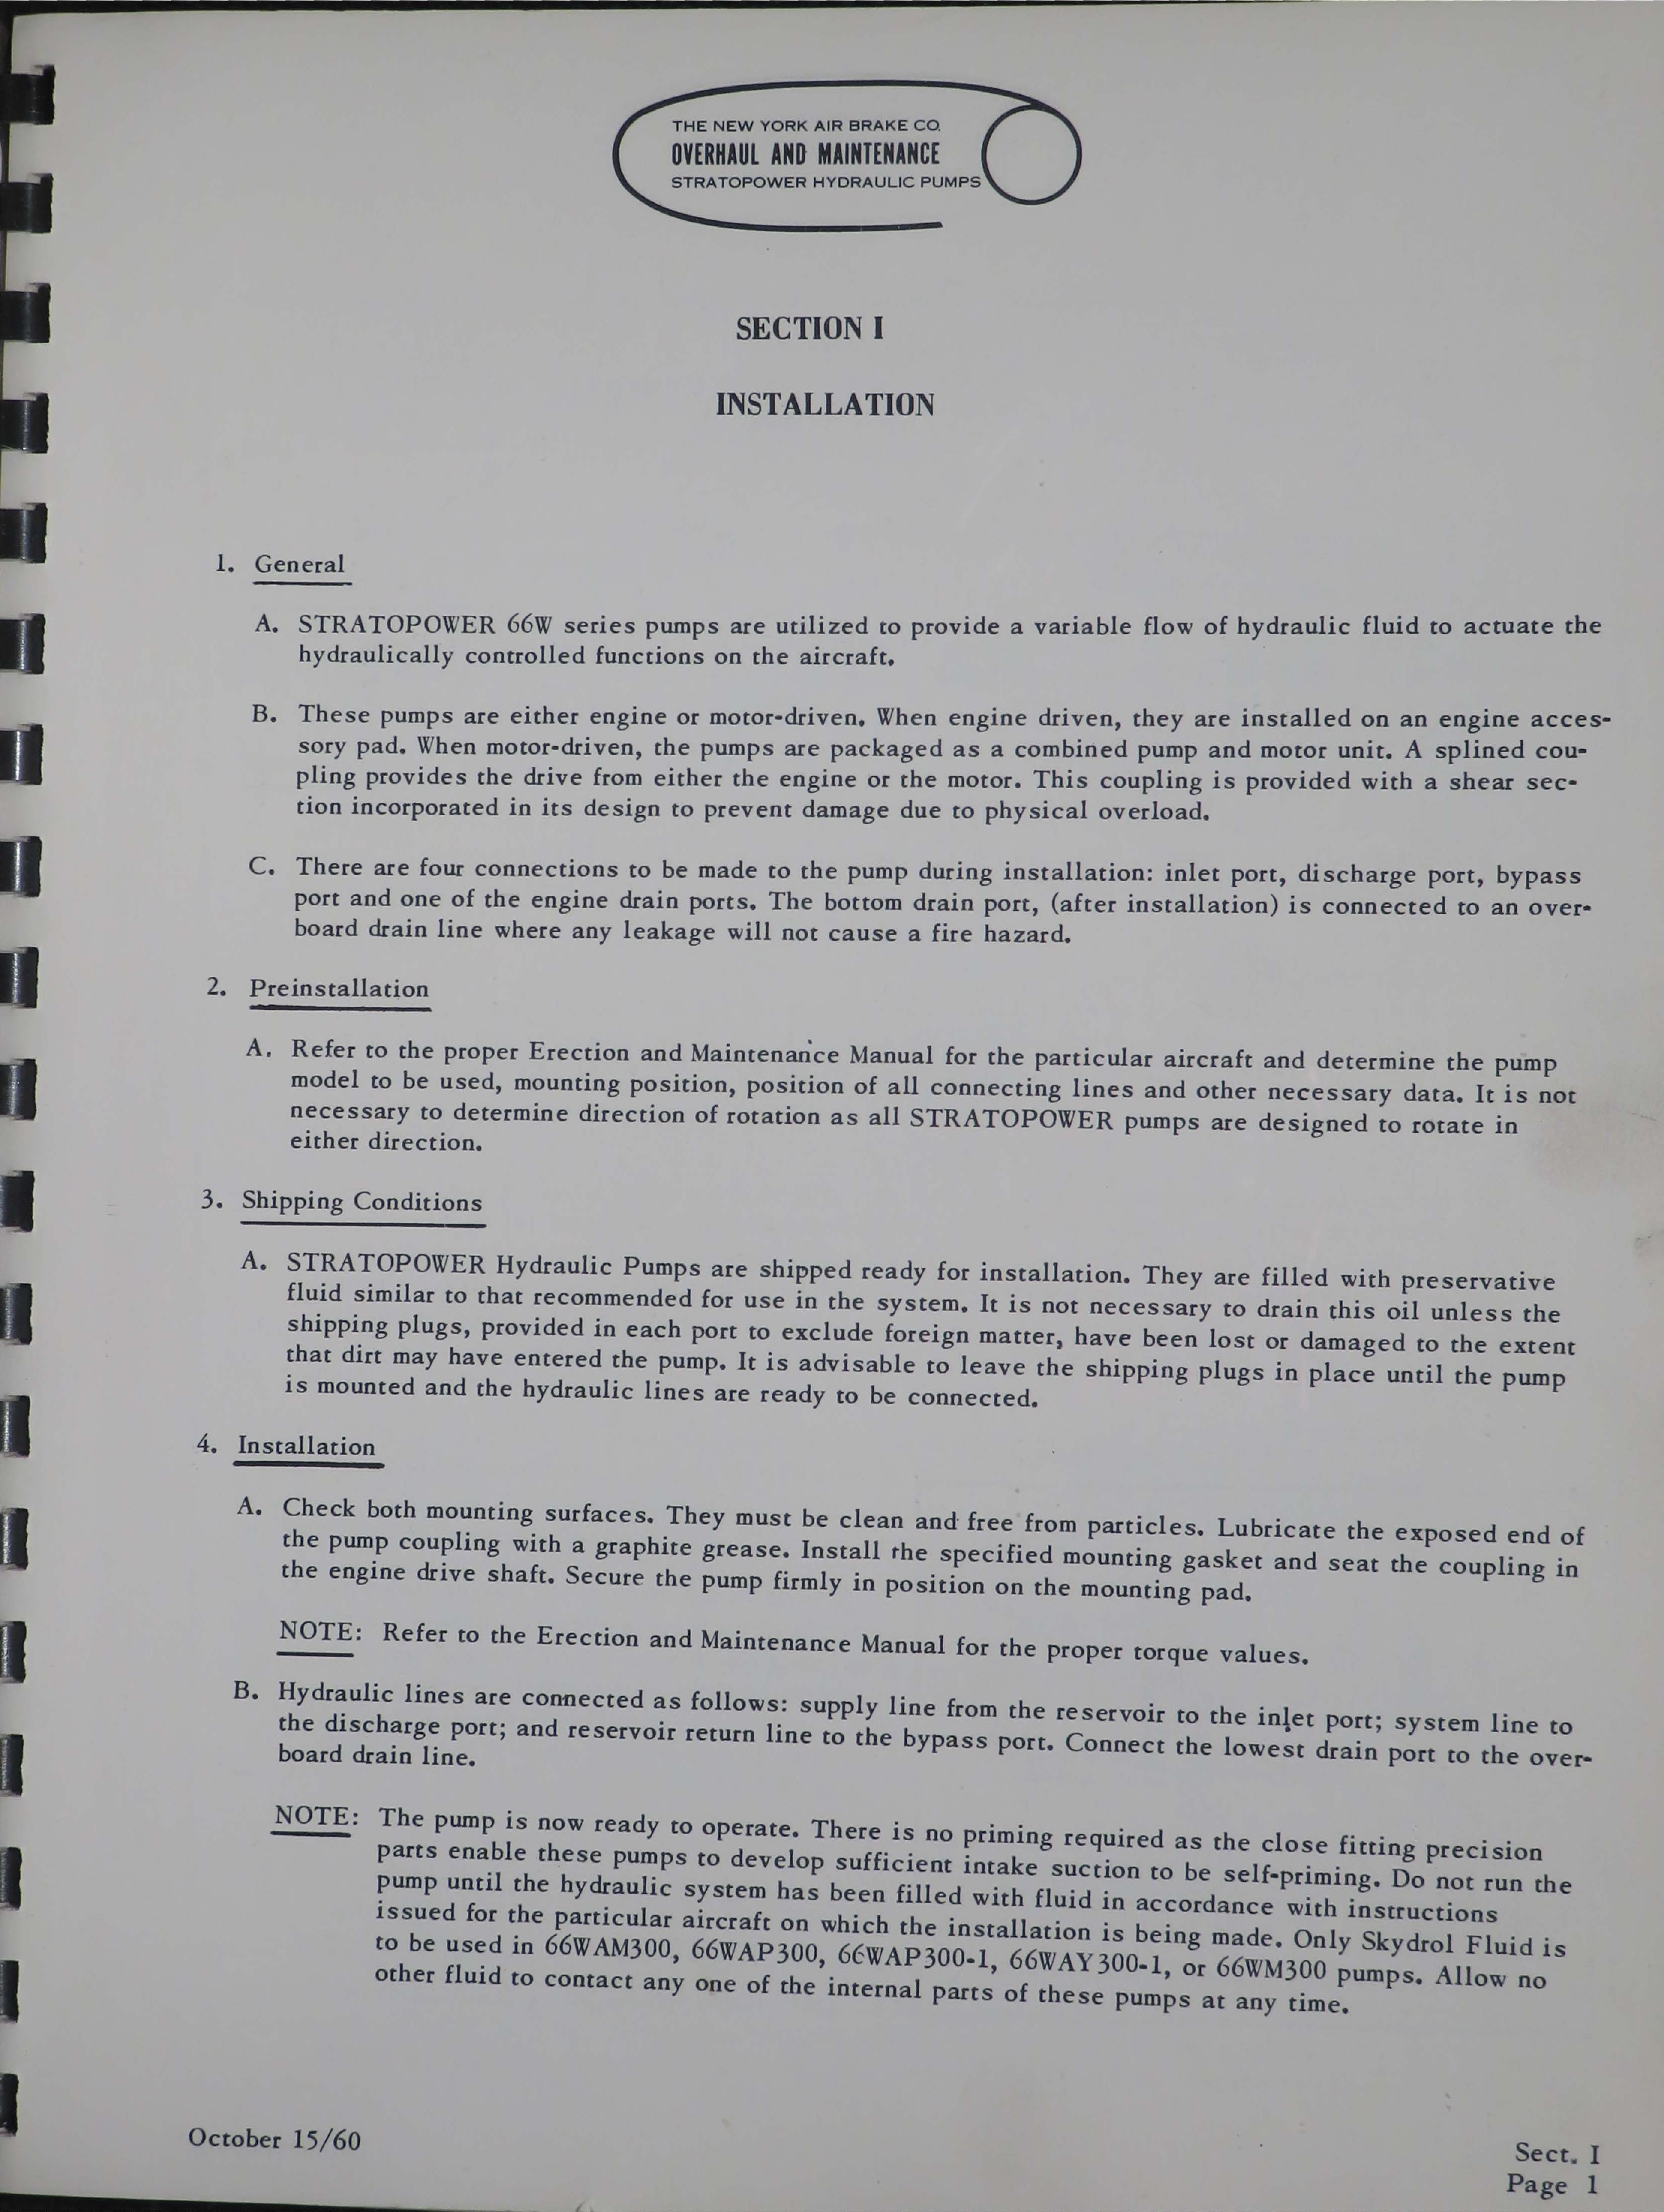 Sample page 9 from AirCorps Library document: Overhaul and Maintenance for Stratopower Hydraulic Pump - Model 66W Series - Temporary Revision No. 1